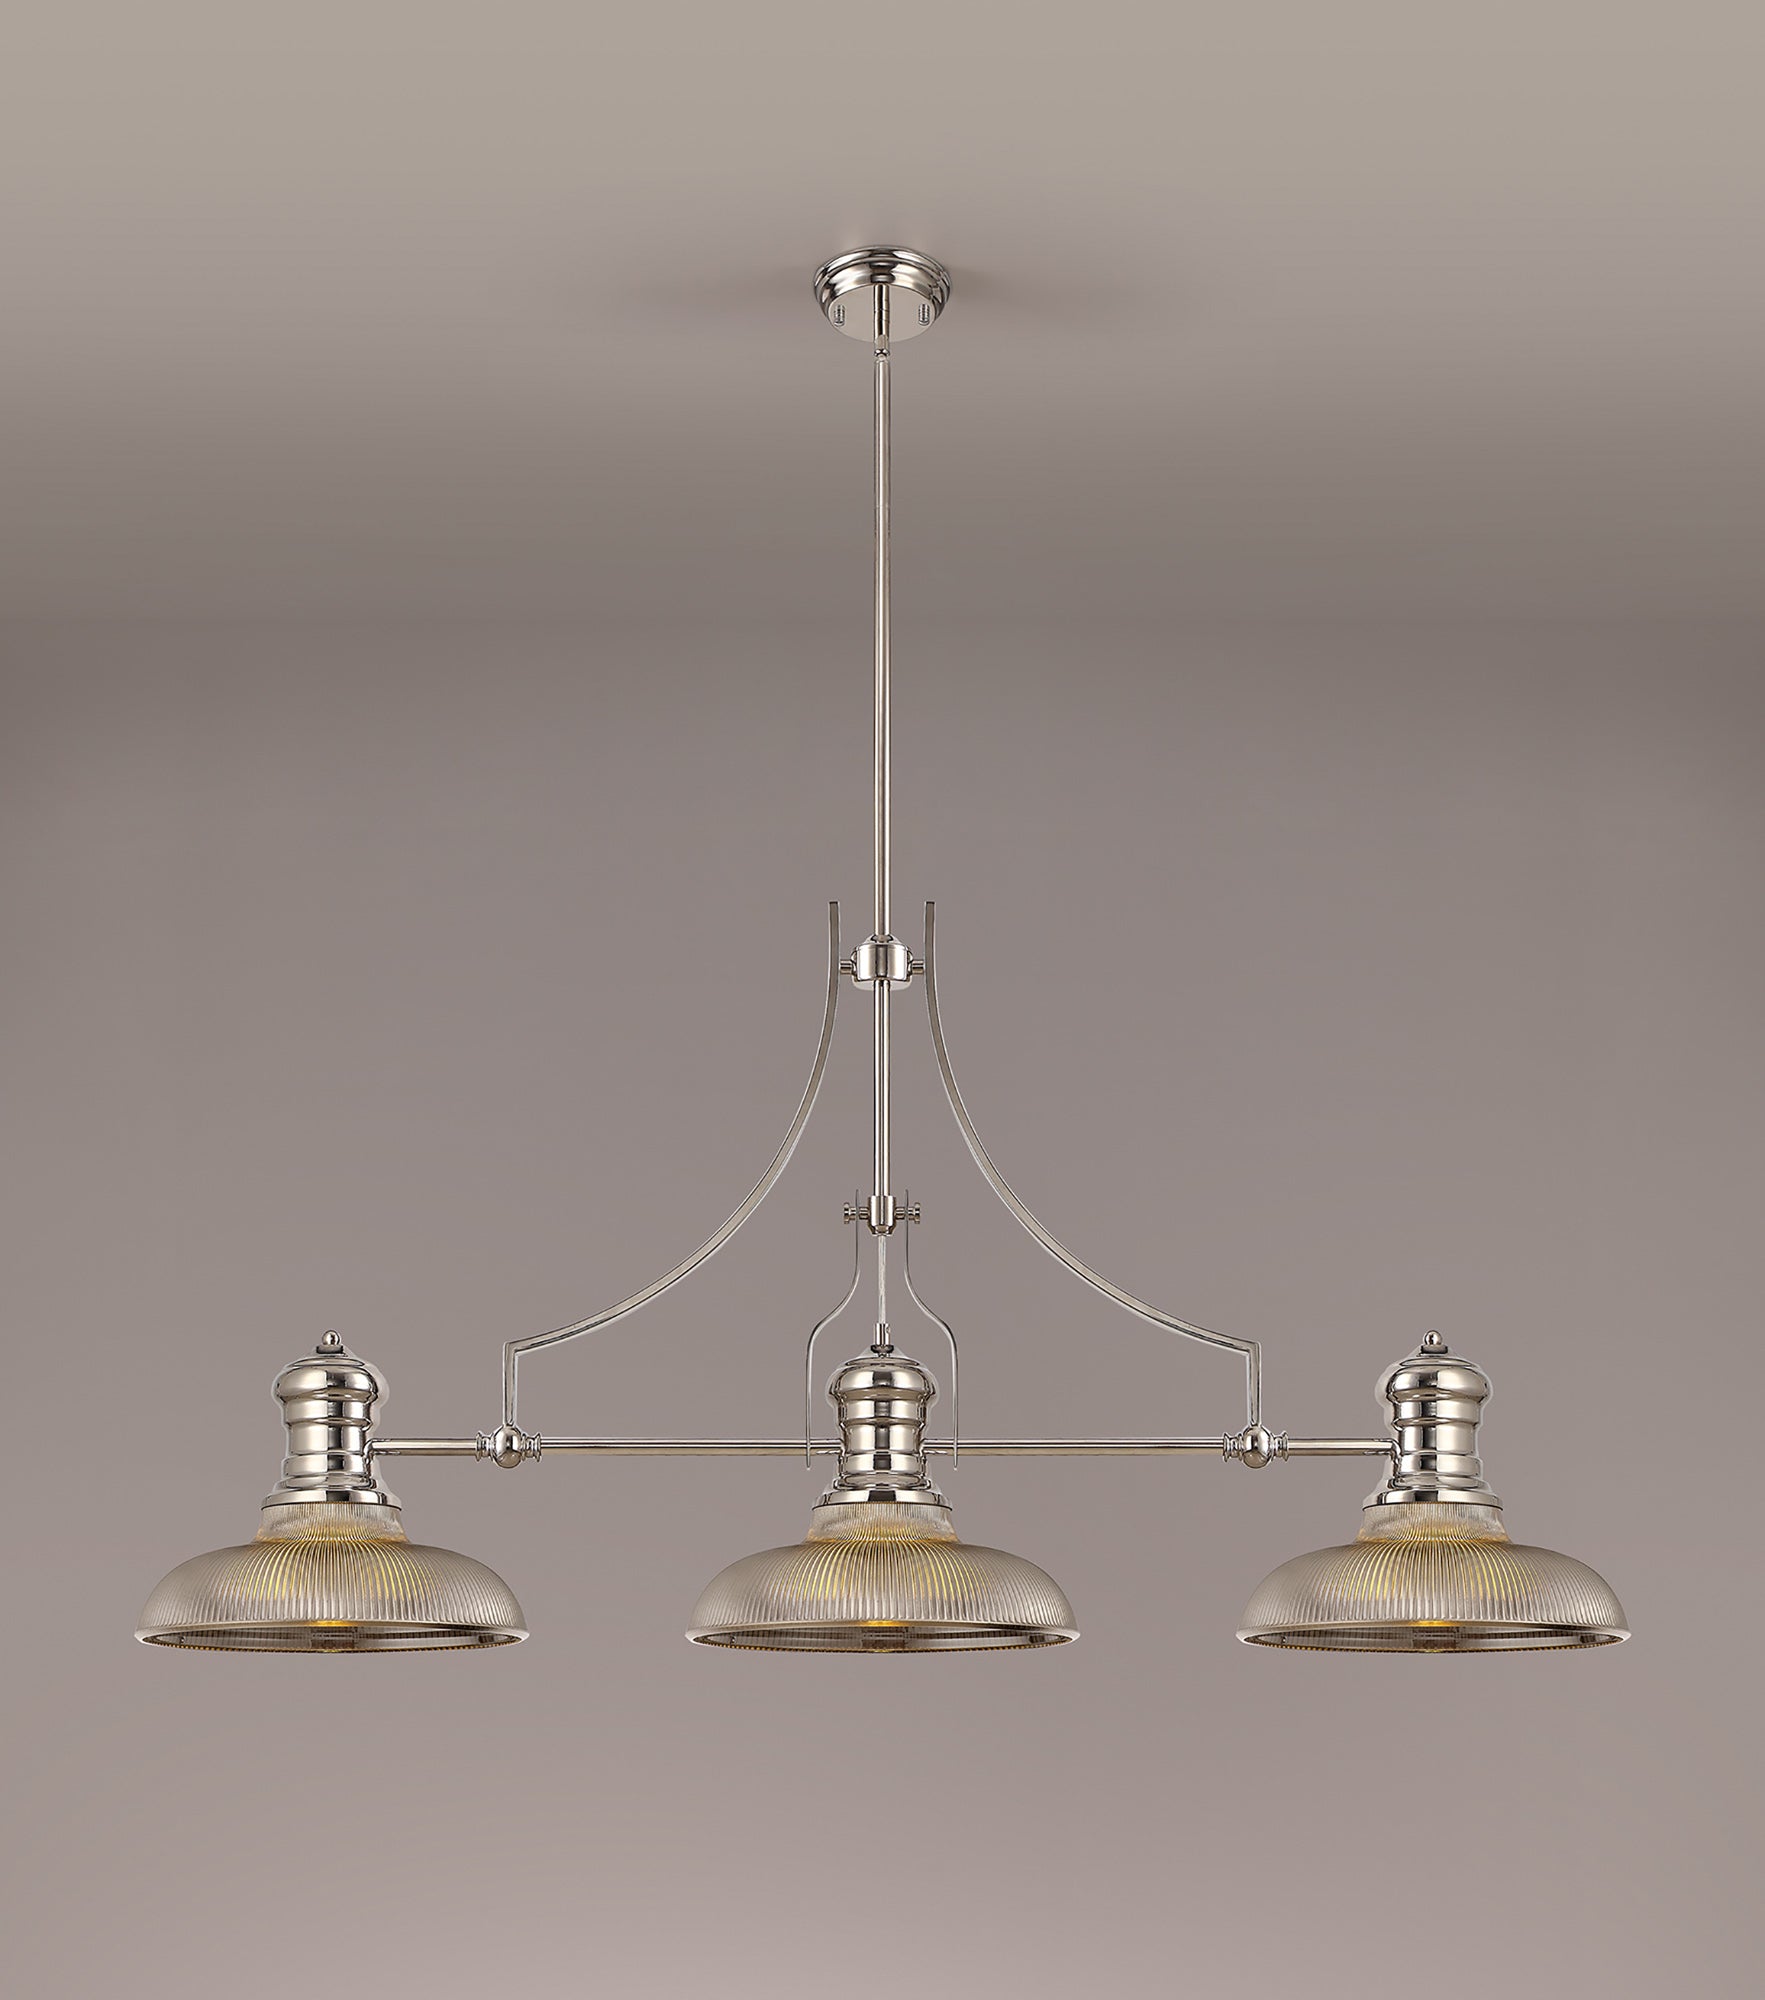 Docker 3 Light Linear Pendant E27 With 30cm Round Glass Shade, Polished Nickel, Smoked